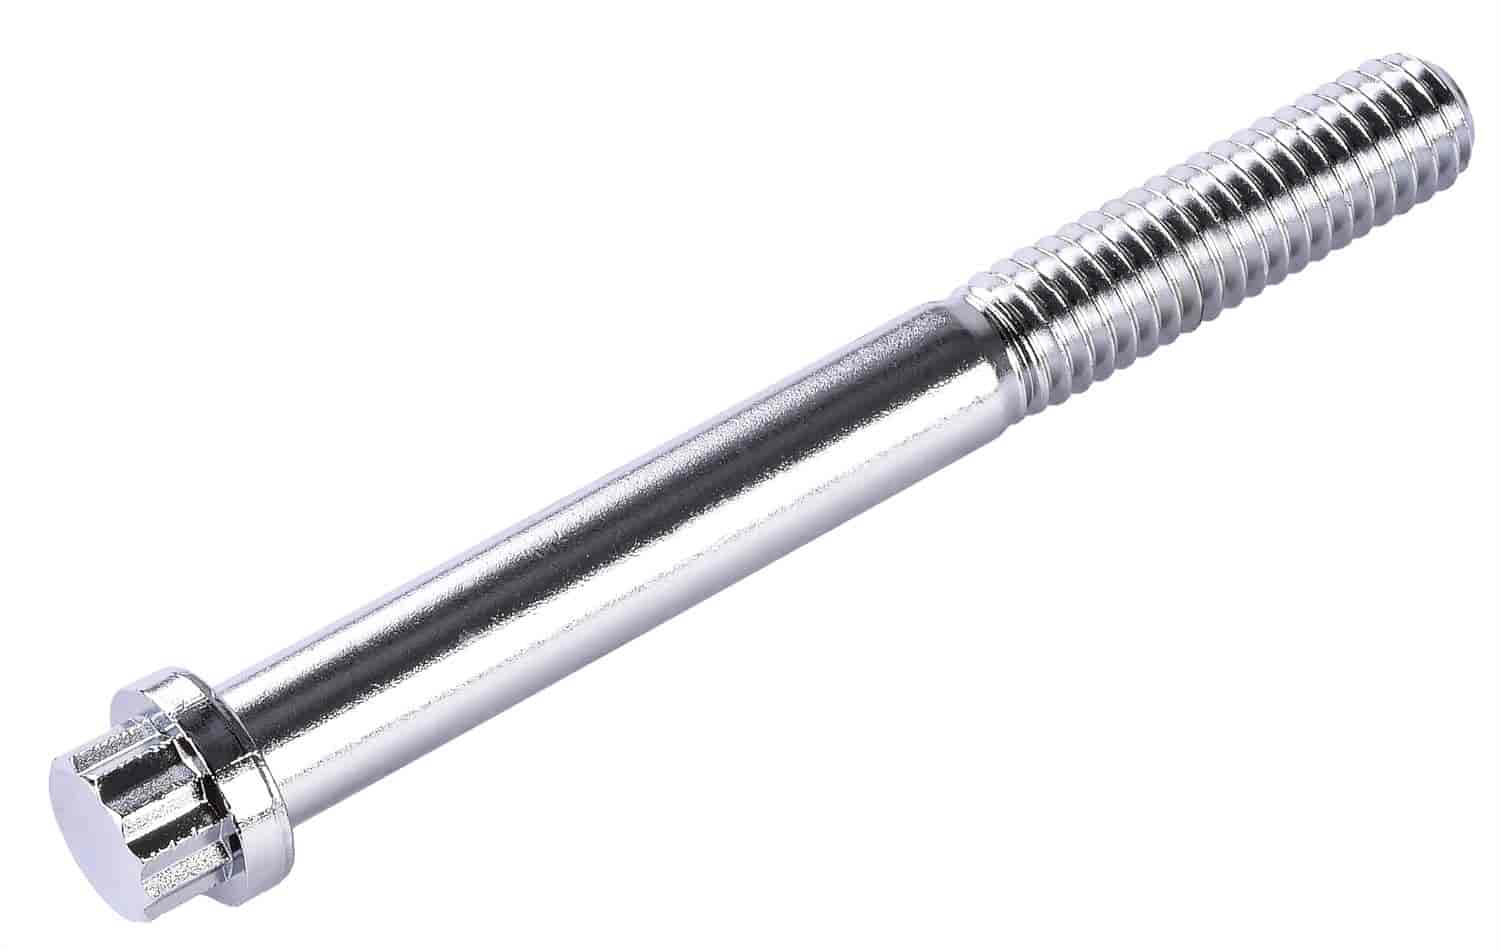 12-Point Fastener [5/16 in. -18 Thread x 3 in. Length]